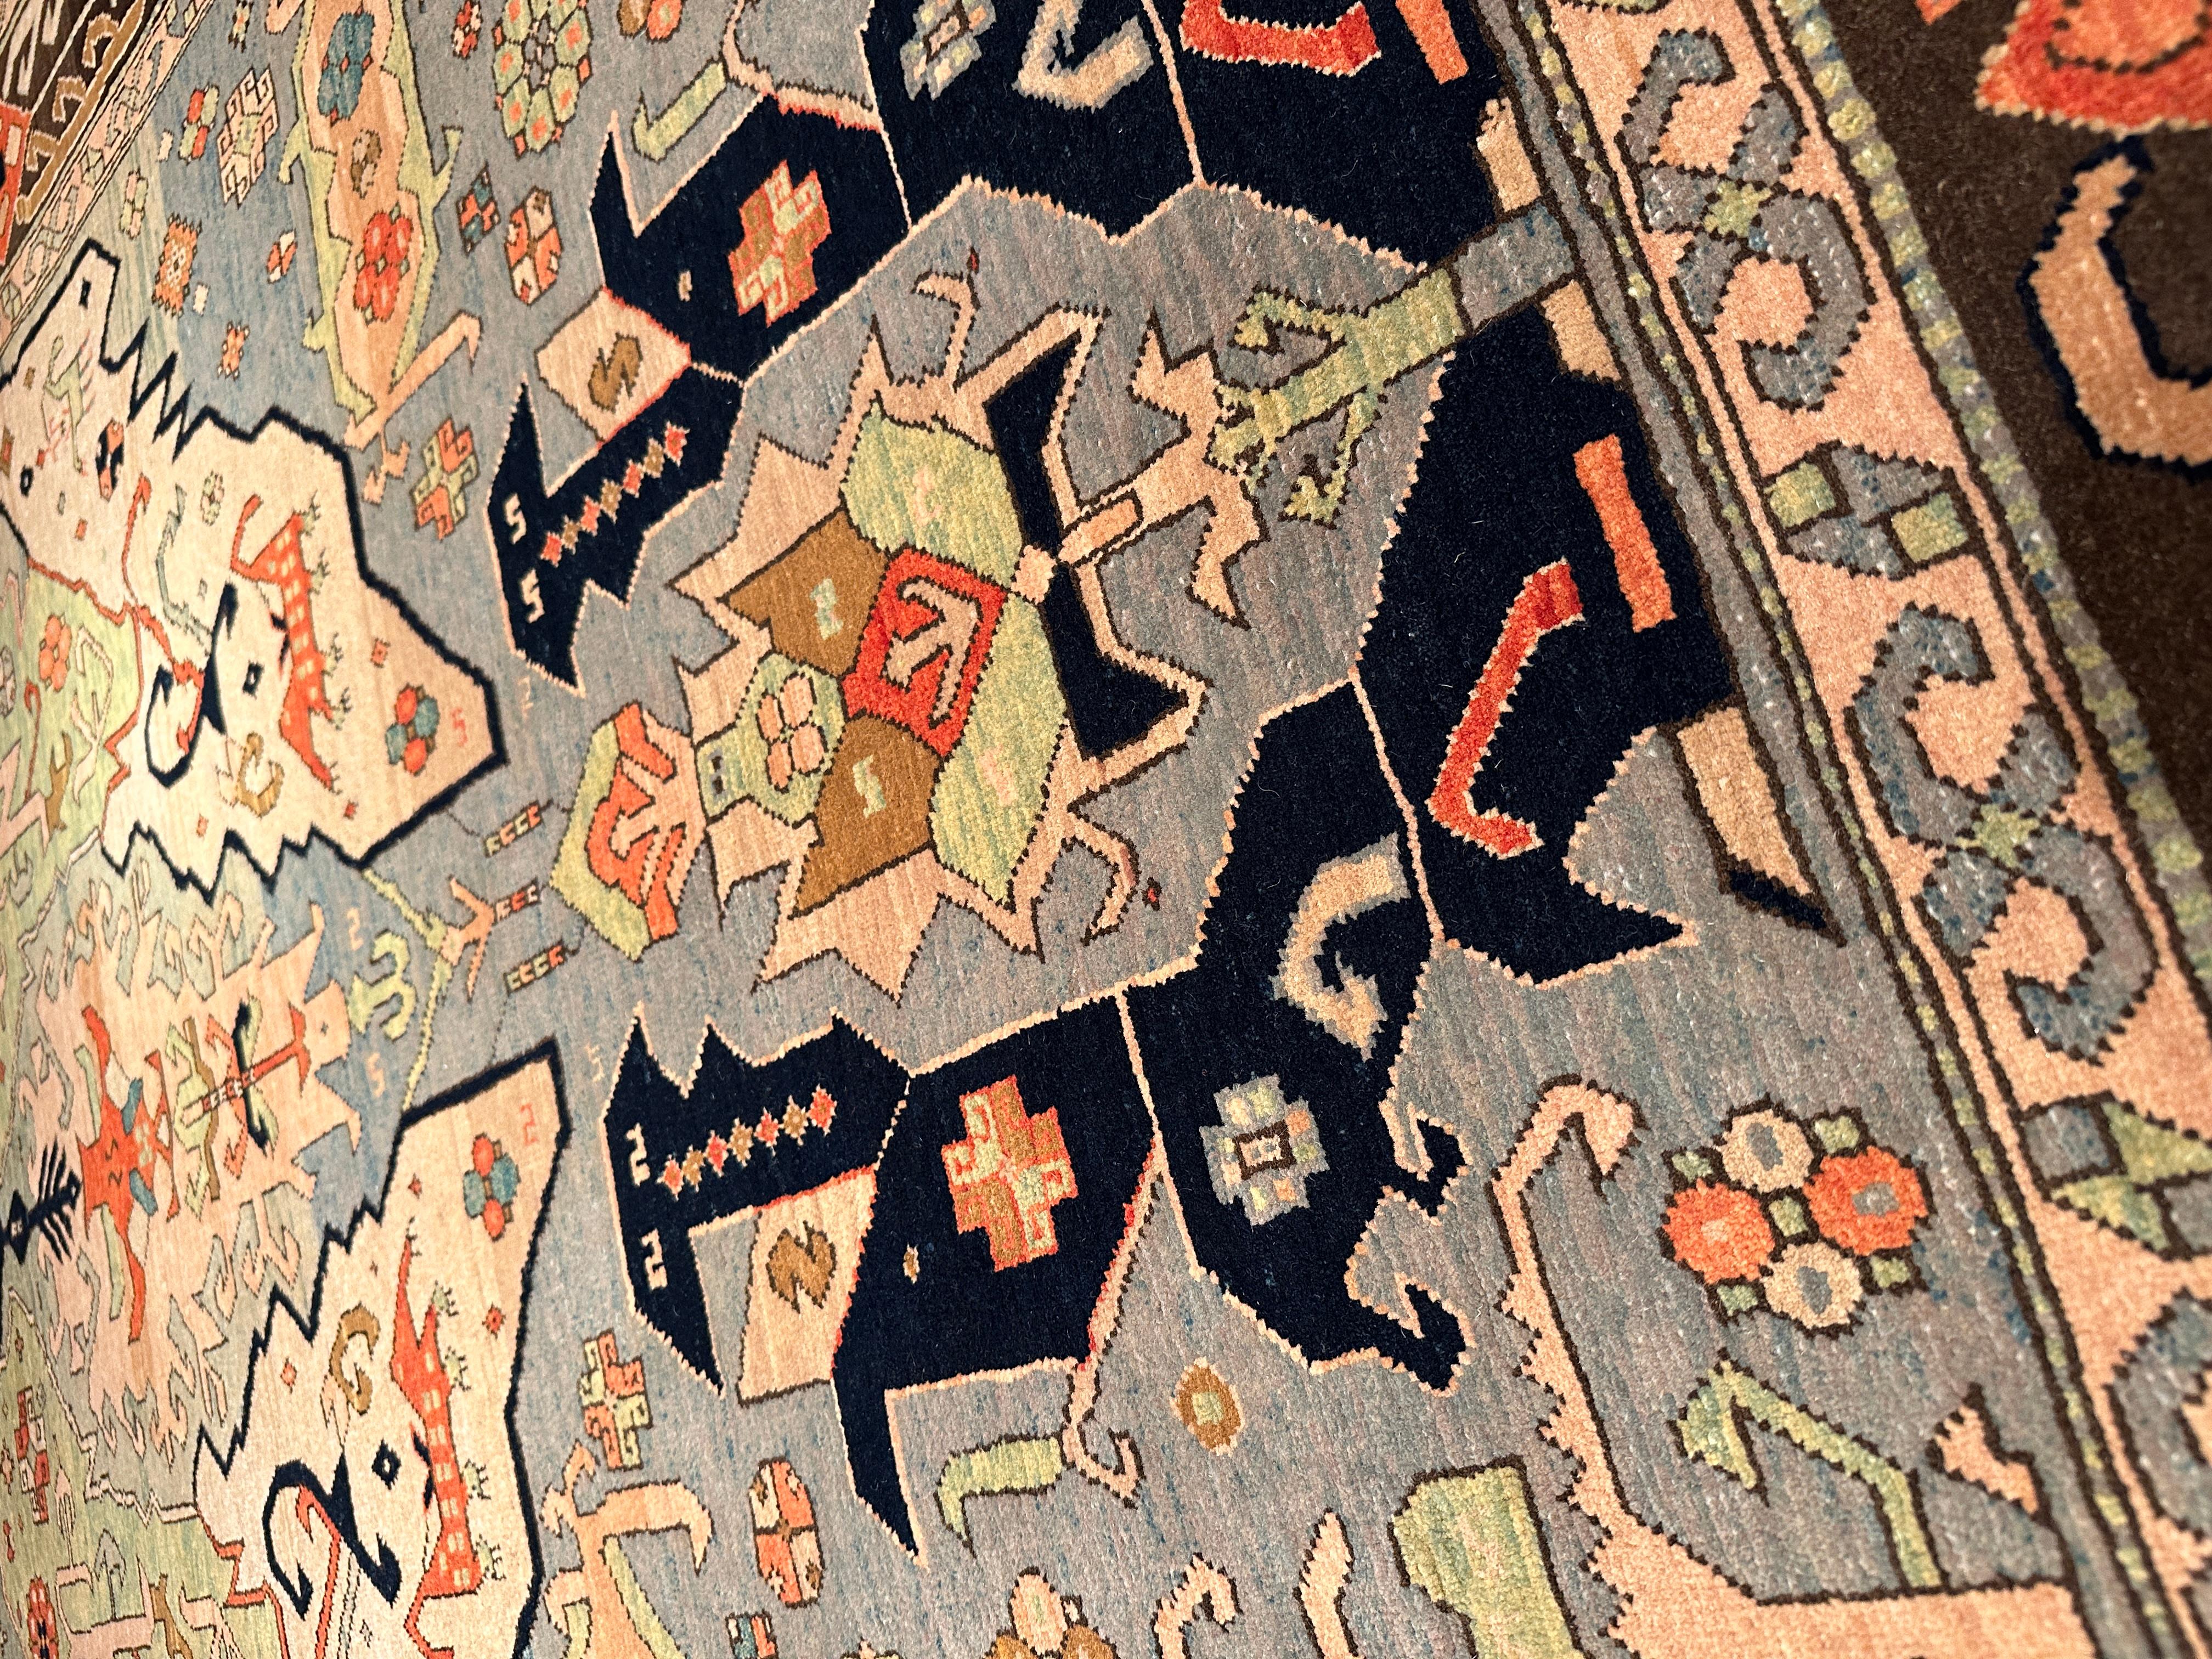 There has long been a fascination with the symbolism of the dragon and its depiction in carpet weavings. The design of ‘Dragon’ carpets consists of a field pattern composed of different colored overlaid lattices formed of pointed, serrated leaves